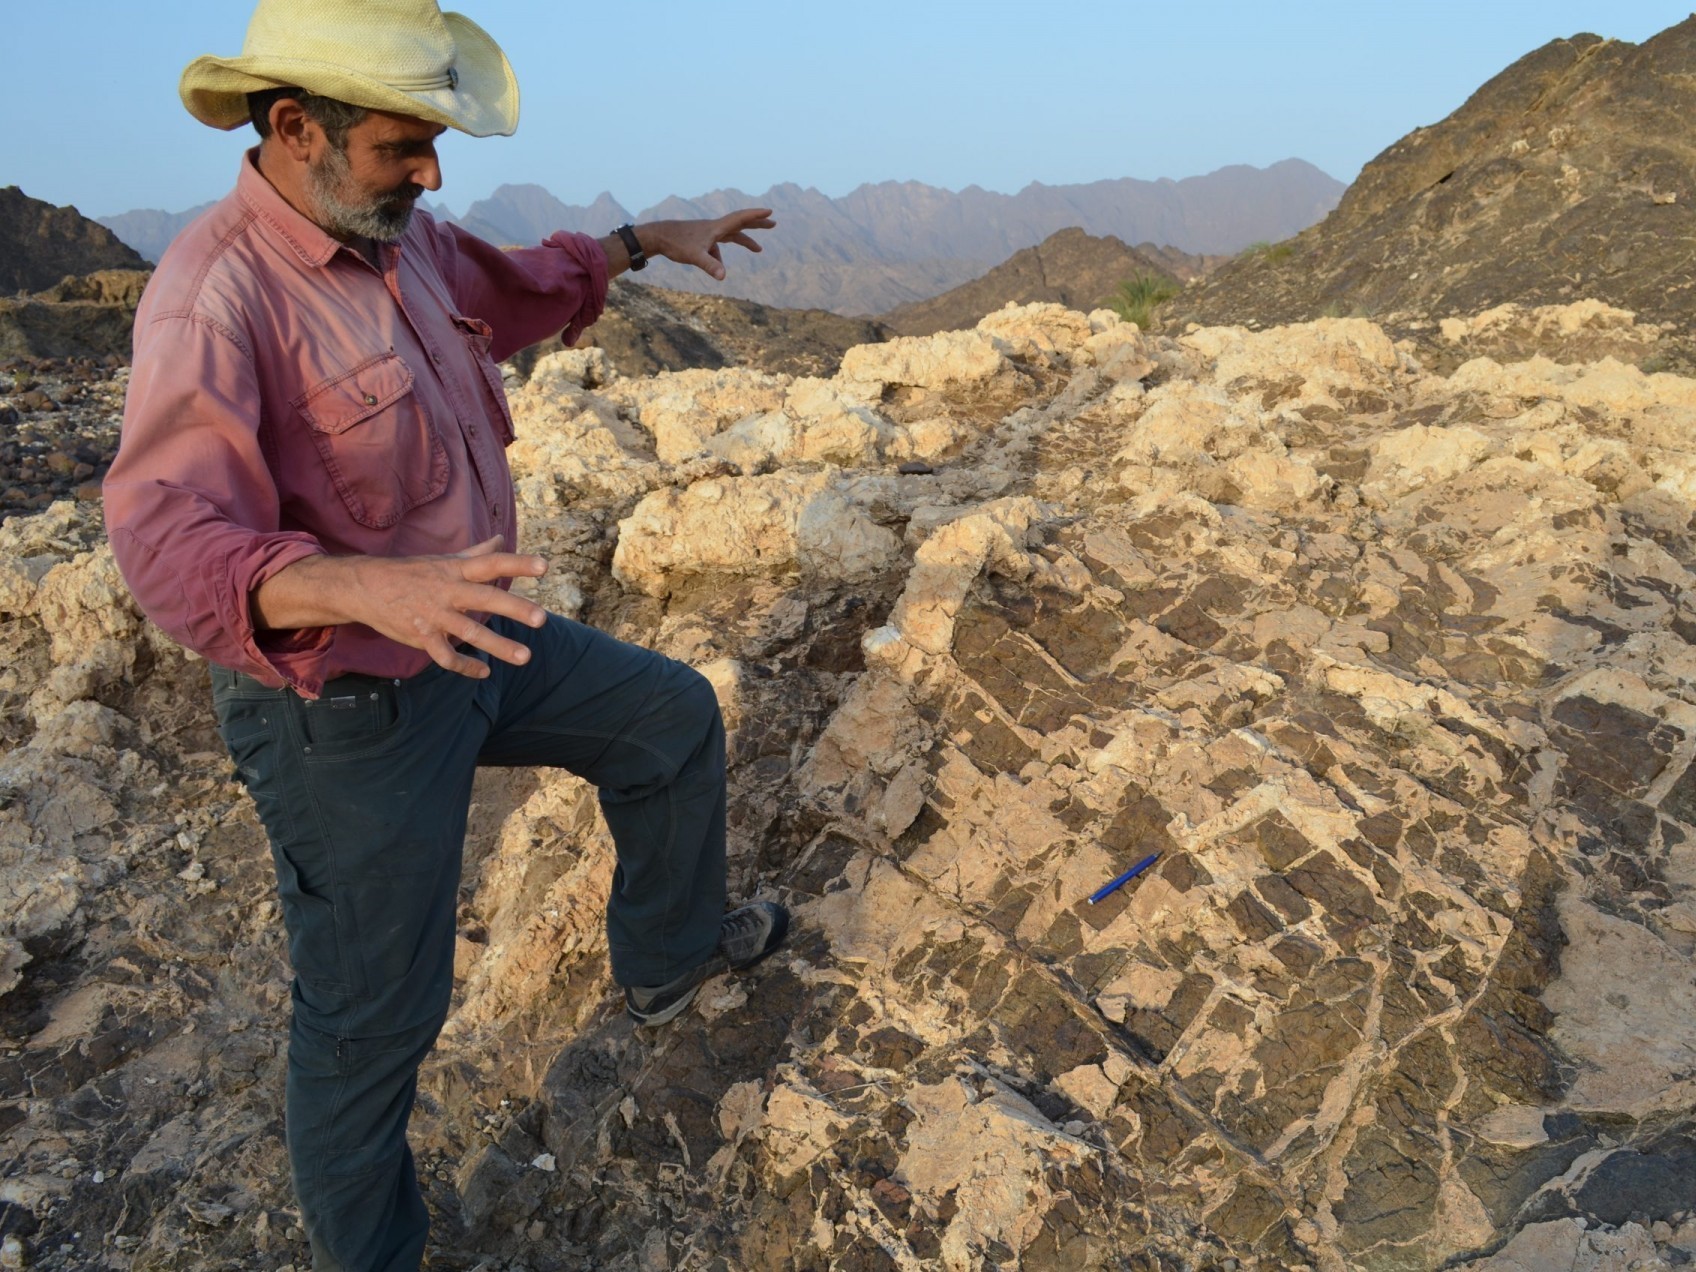 Geologist Peter Kelemen surveys an outcrop of exposed mantle rock in Oman. The light material is a carbon-based mineral that has reacted with the rock to form a solid deposit. Credit: Kevin Krajick